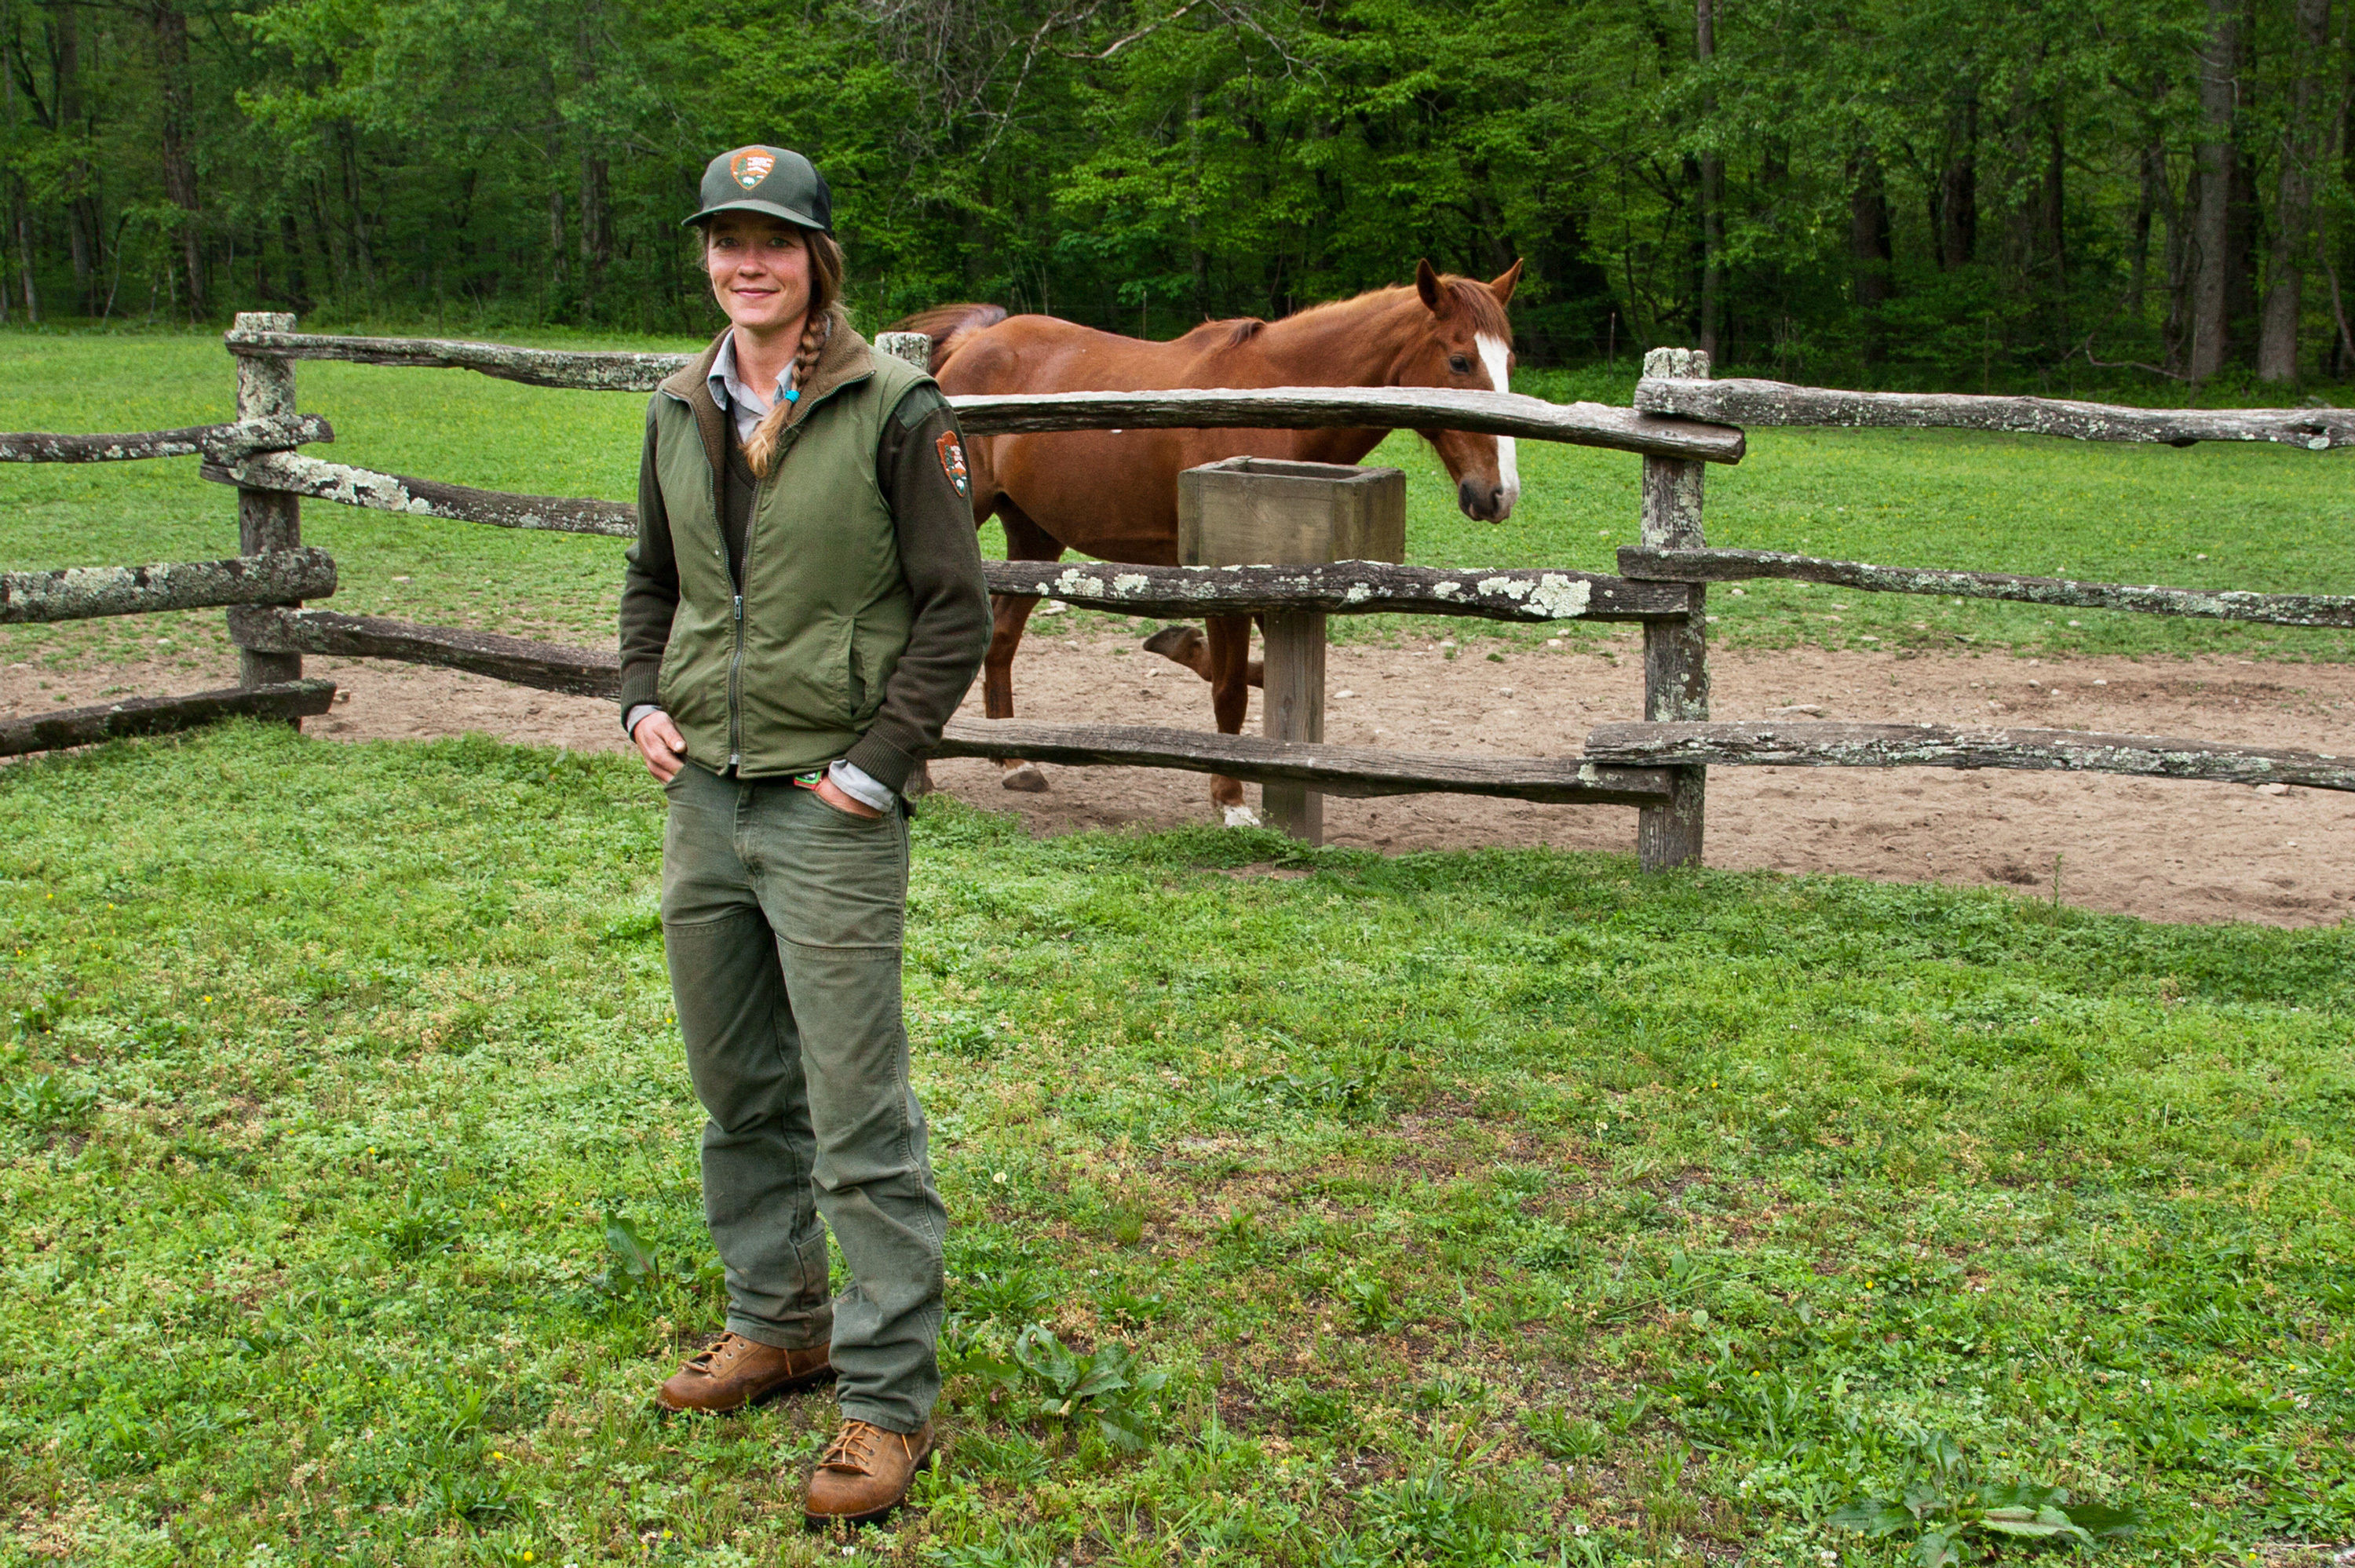 Heidi Brill works with the Trails crew as an animal caretaker. She has been working for the National Park Service for 8 years.